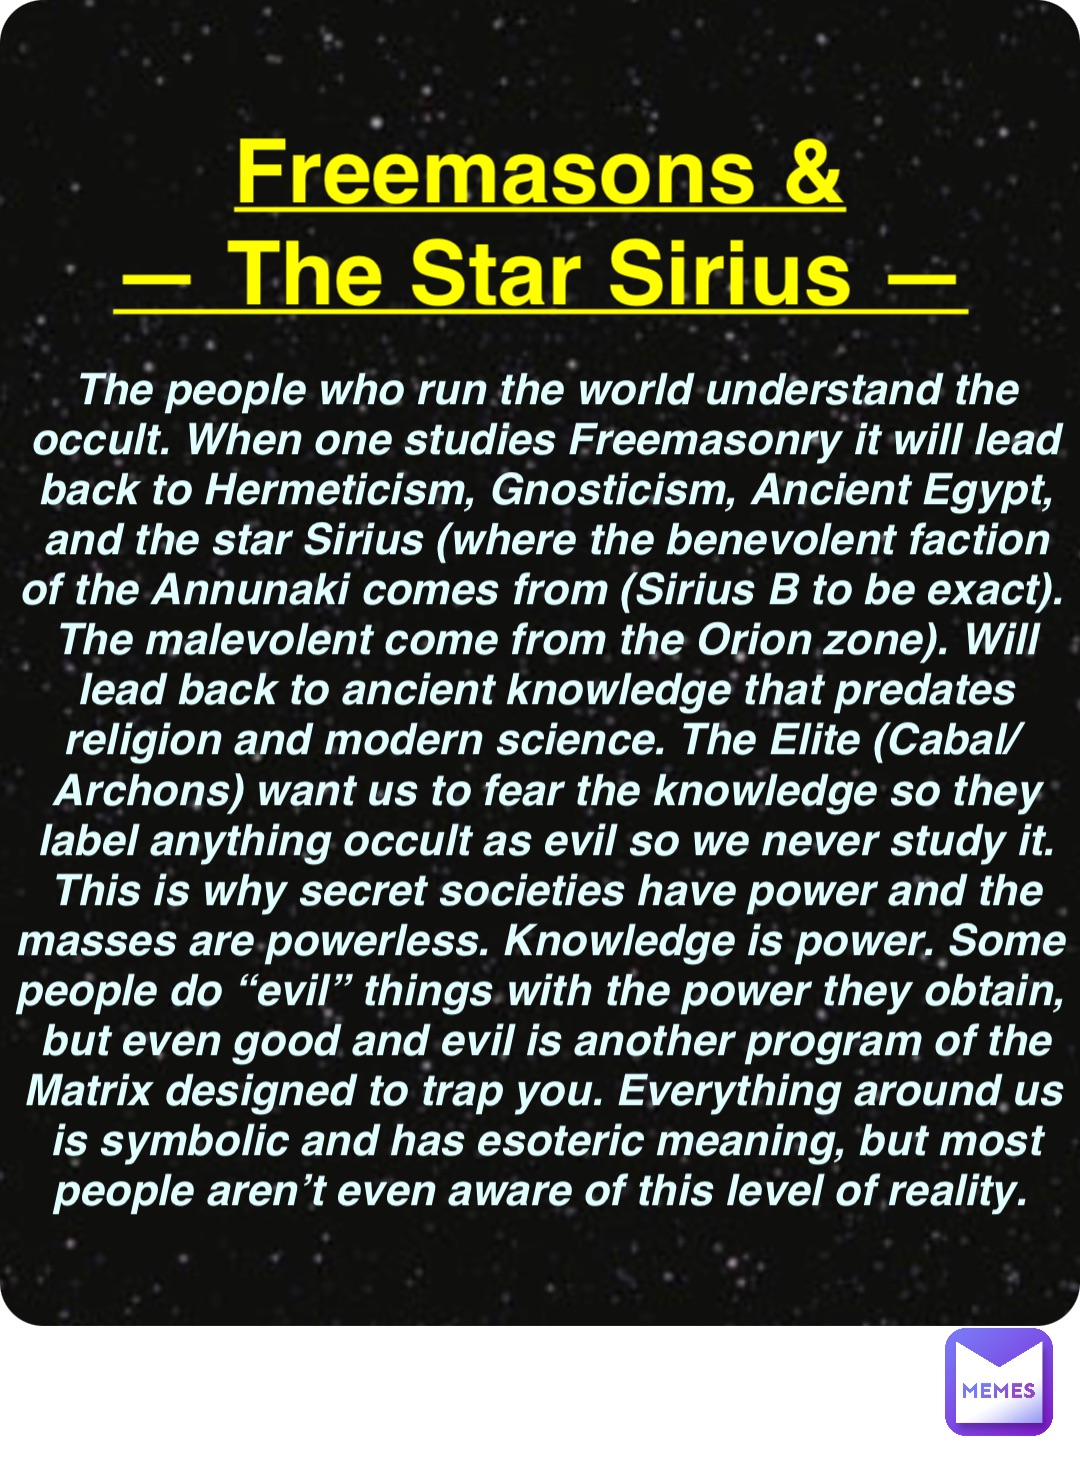 Double tap to edit Freemasons &
— The Star Sirius — The people who run the world understand the occult. When one studies Freemasonry it will lead back to Hermeticism, Gnosticism, Ancient Egypt, and the star Sirius (where the benevolent faction of the Annunaki comes from (Sirius B to be exact). The malevolent come from the Orion zone). Will lead back to ancient knowledge that predates religion and modern science. The Elite (Cabal/Archons) want us to fear the knowledge so they label anything occult as evil so we never study it. This is why secret societies have power and the masses are powerless. Knowledge is power. Some people do “evil” things with the power they obtain, but even good and evil is another program of the Matrix designed to trap you. Everything around us is symbolic and has esoteric meaning, but most people aren’t even aware of this level of reality.